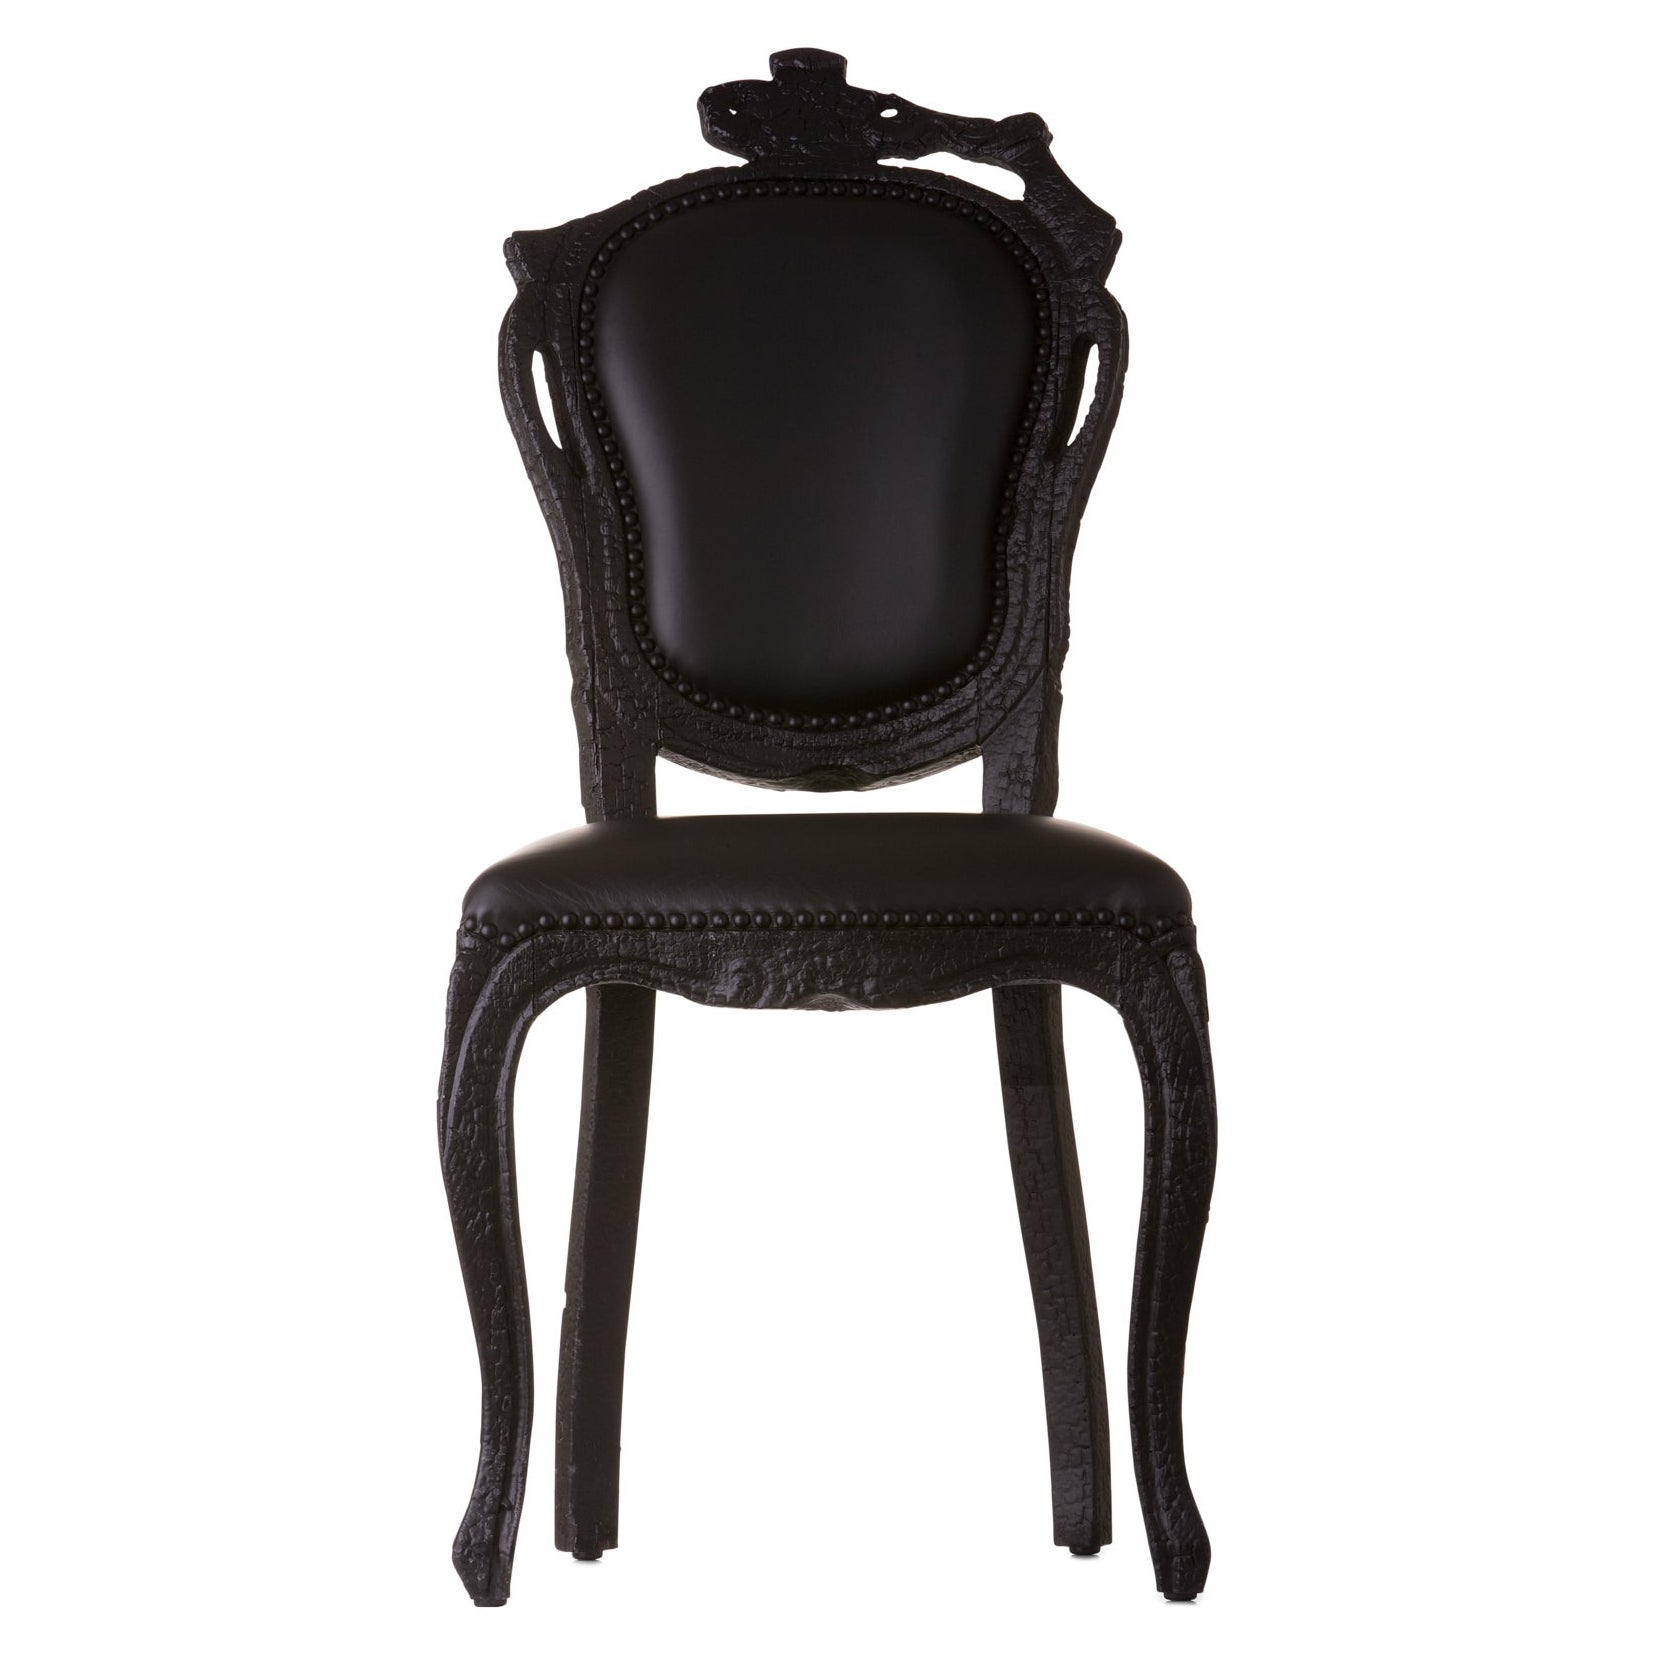 Moooi Smoke Dining Chair in Abbracci, Black Upholstery with Burnt Wood Frame For Sale